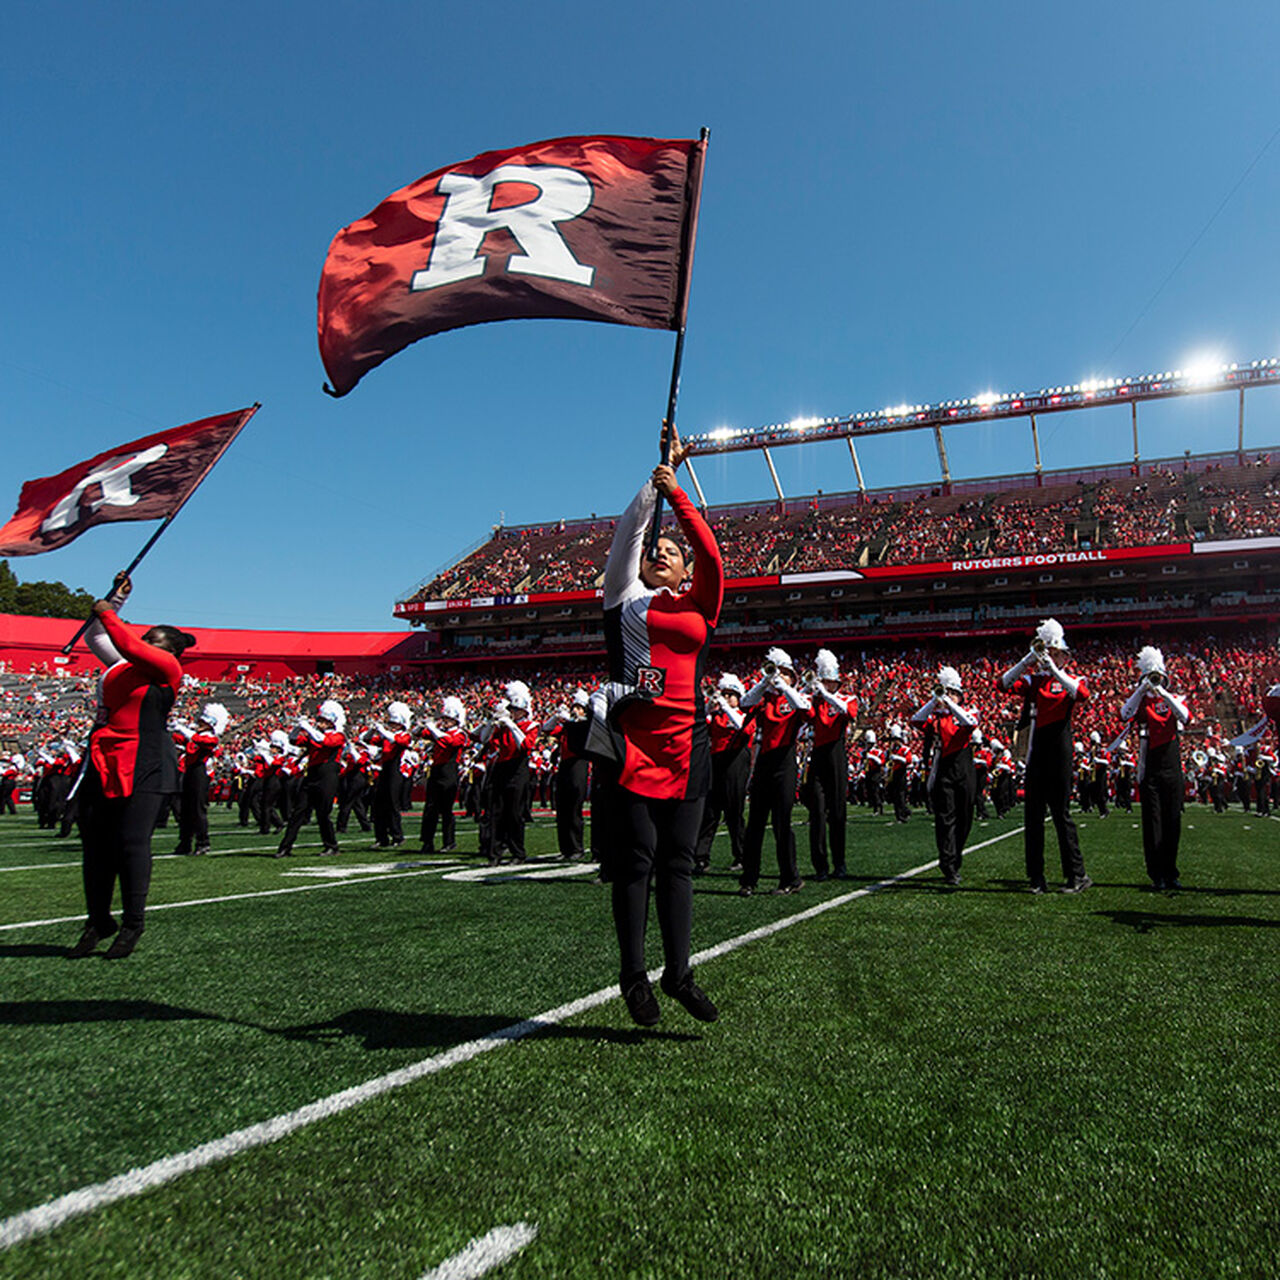 The Scarlet Knight Marching Band performing at Shi Stadium image number 0